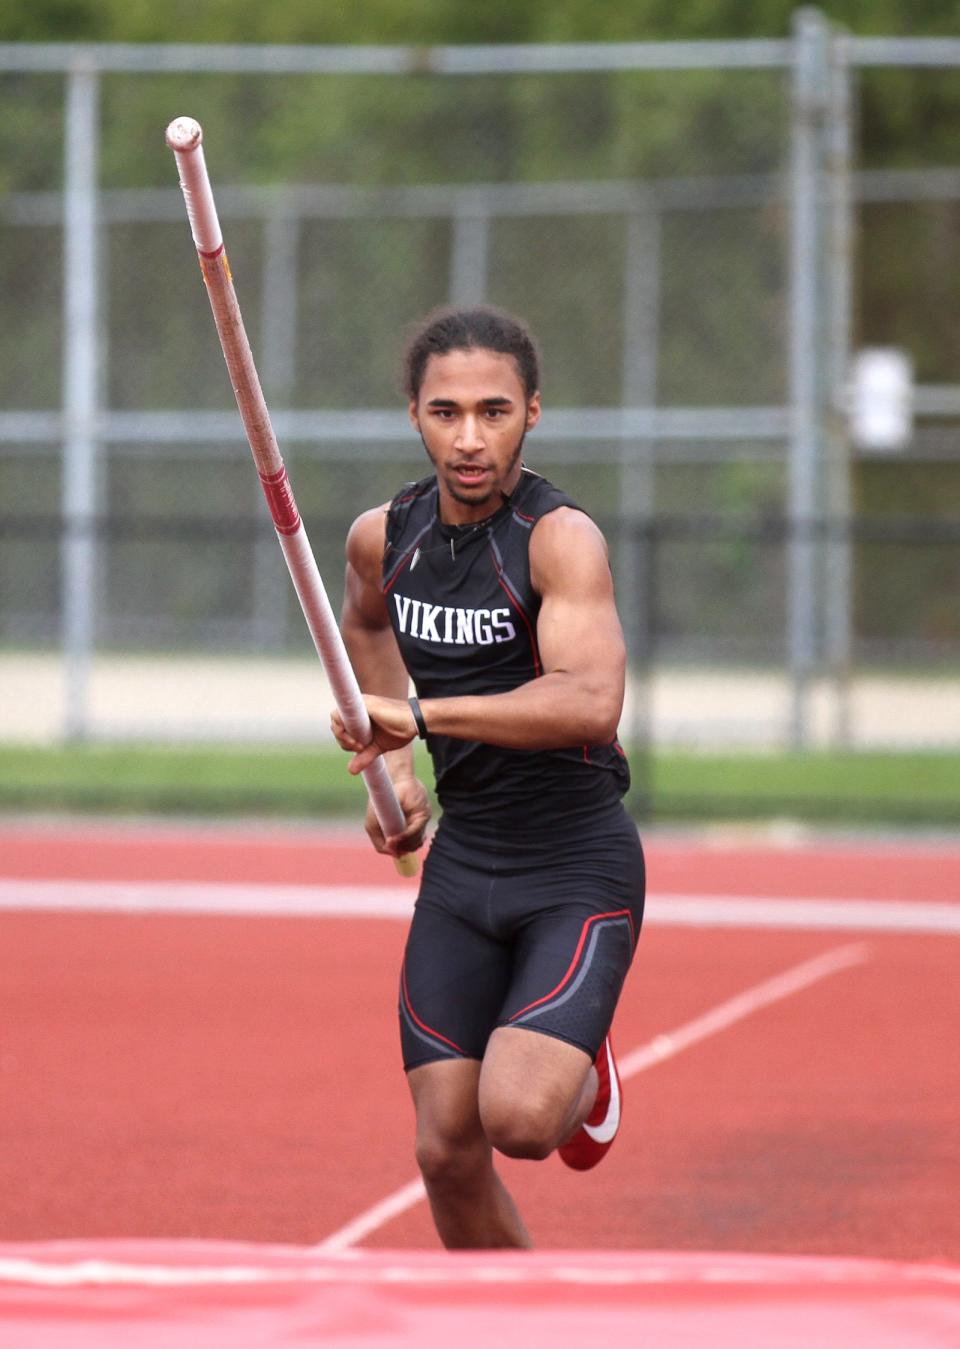 Kordell Tate-O'Brien won the Eastern Division pole vault title this past season and placed third in the state.